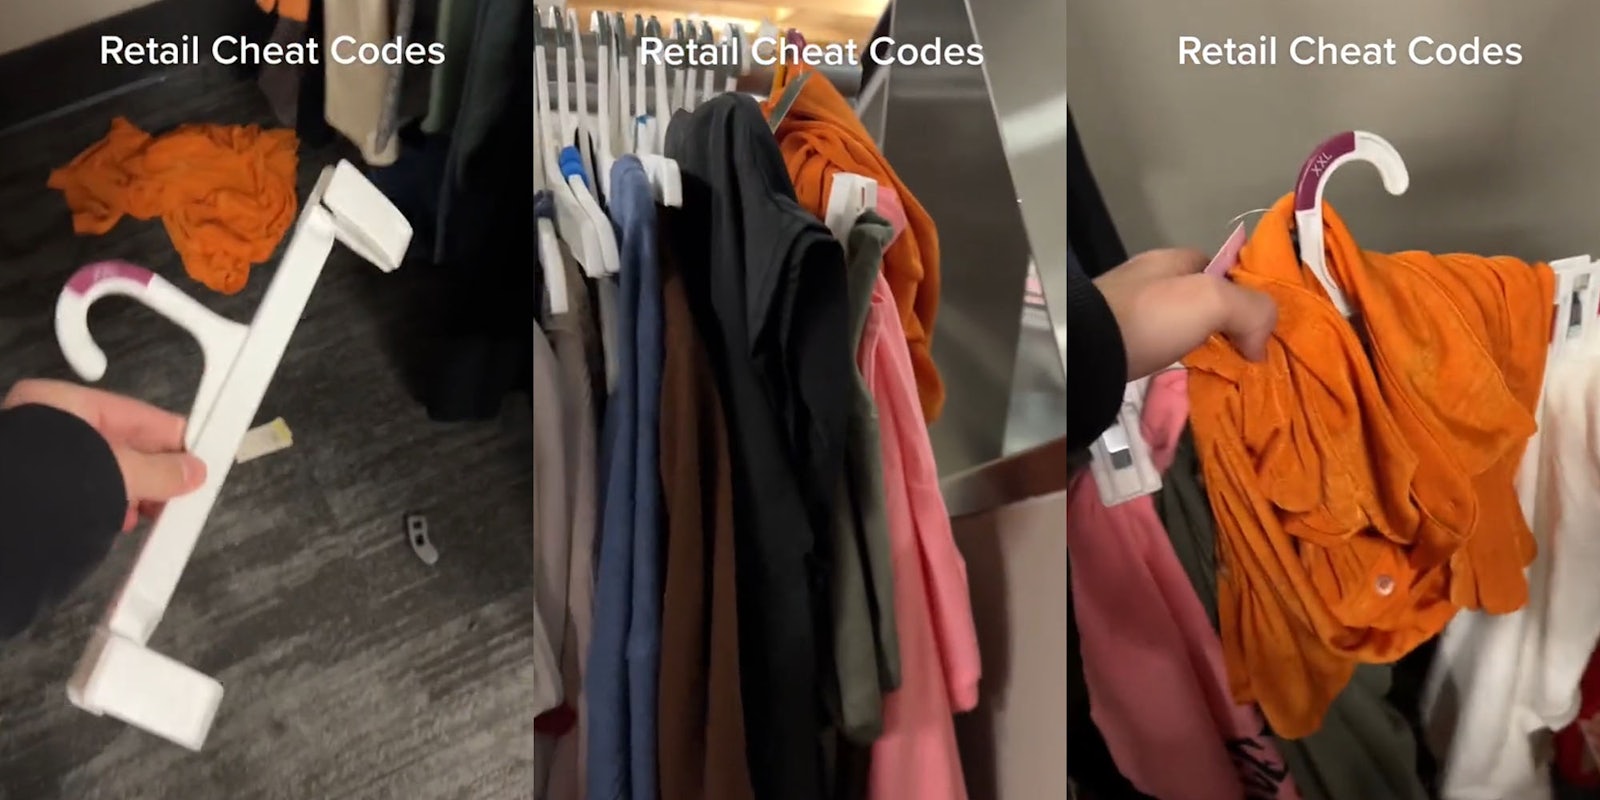 Target employee holding clothing hanger caption 'Retail Cheat Code' (l) Target clothing wrack with messy hanger hidden in back caption 'Retail Cheat Code' (c) Target employee holding clothing hanger with multiple items on it caption 'Retail Cheat Code' (r)